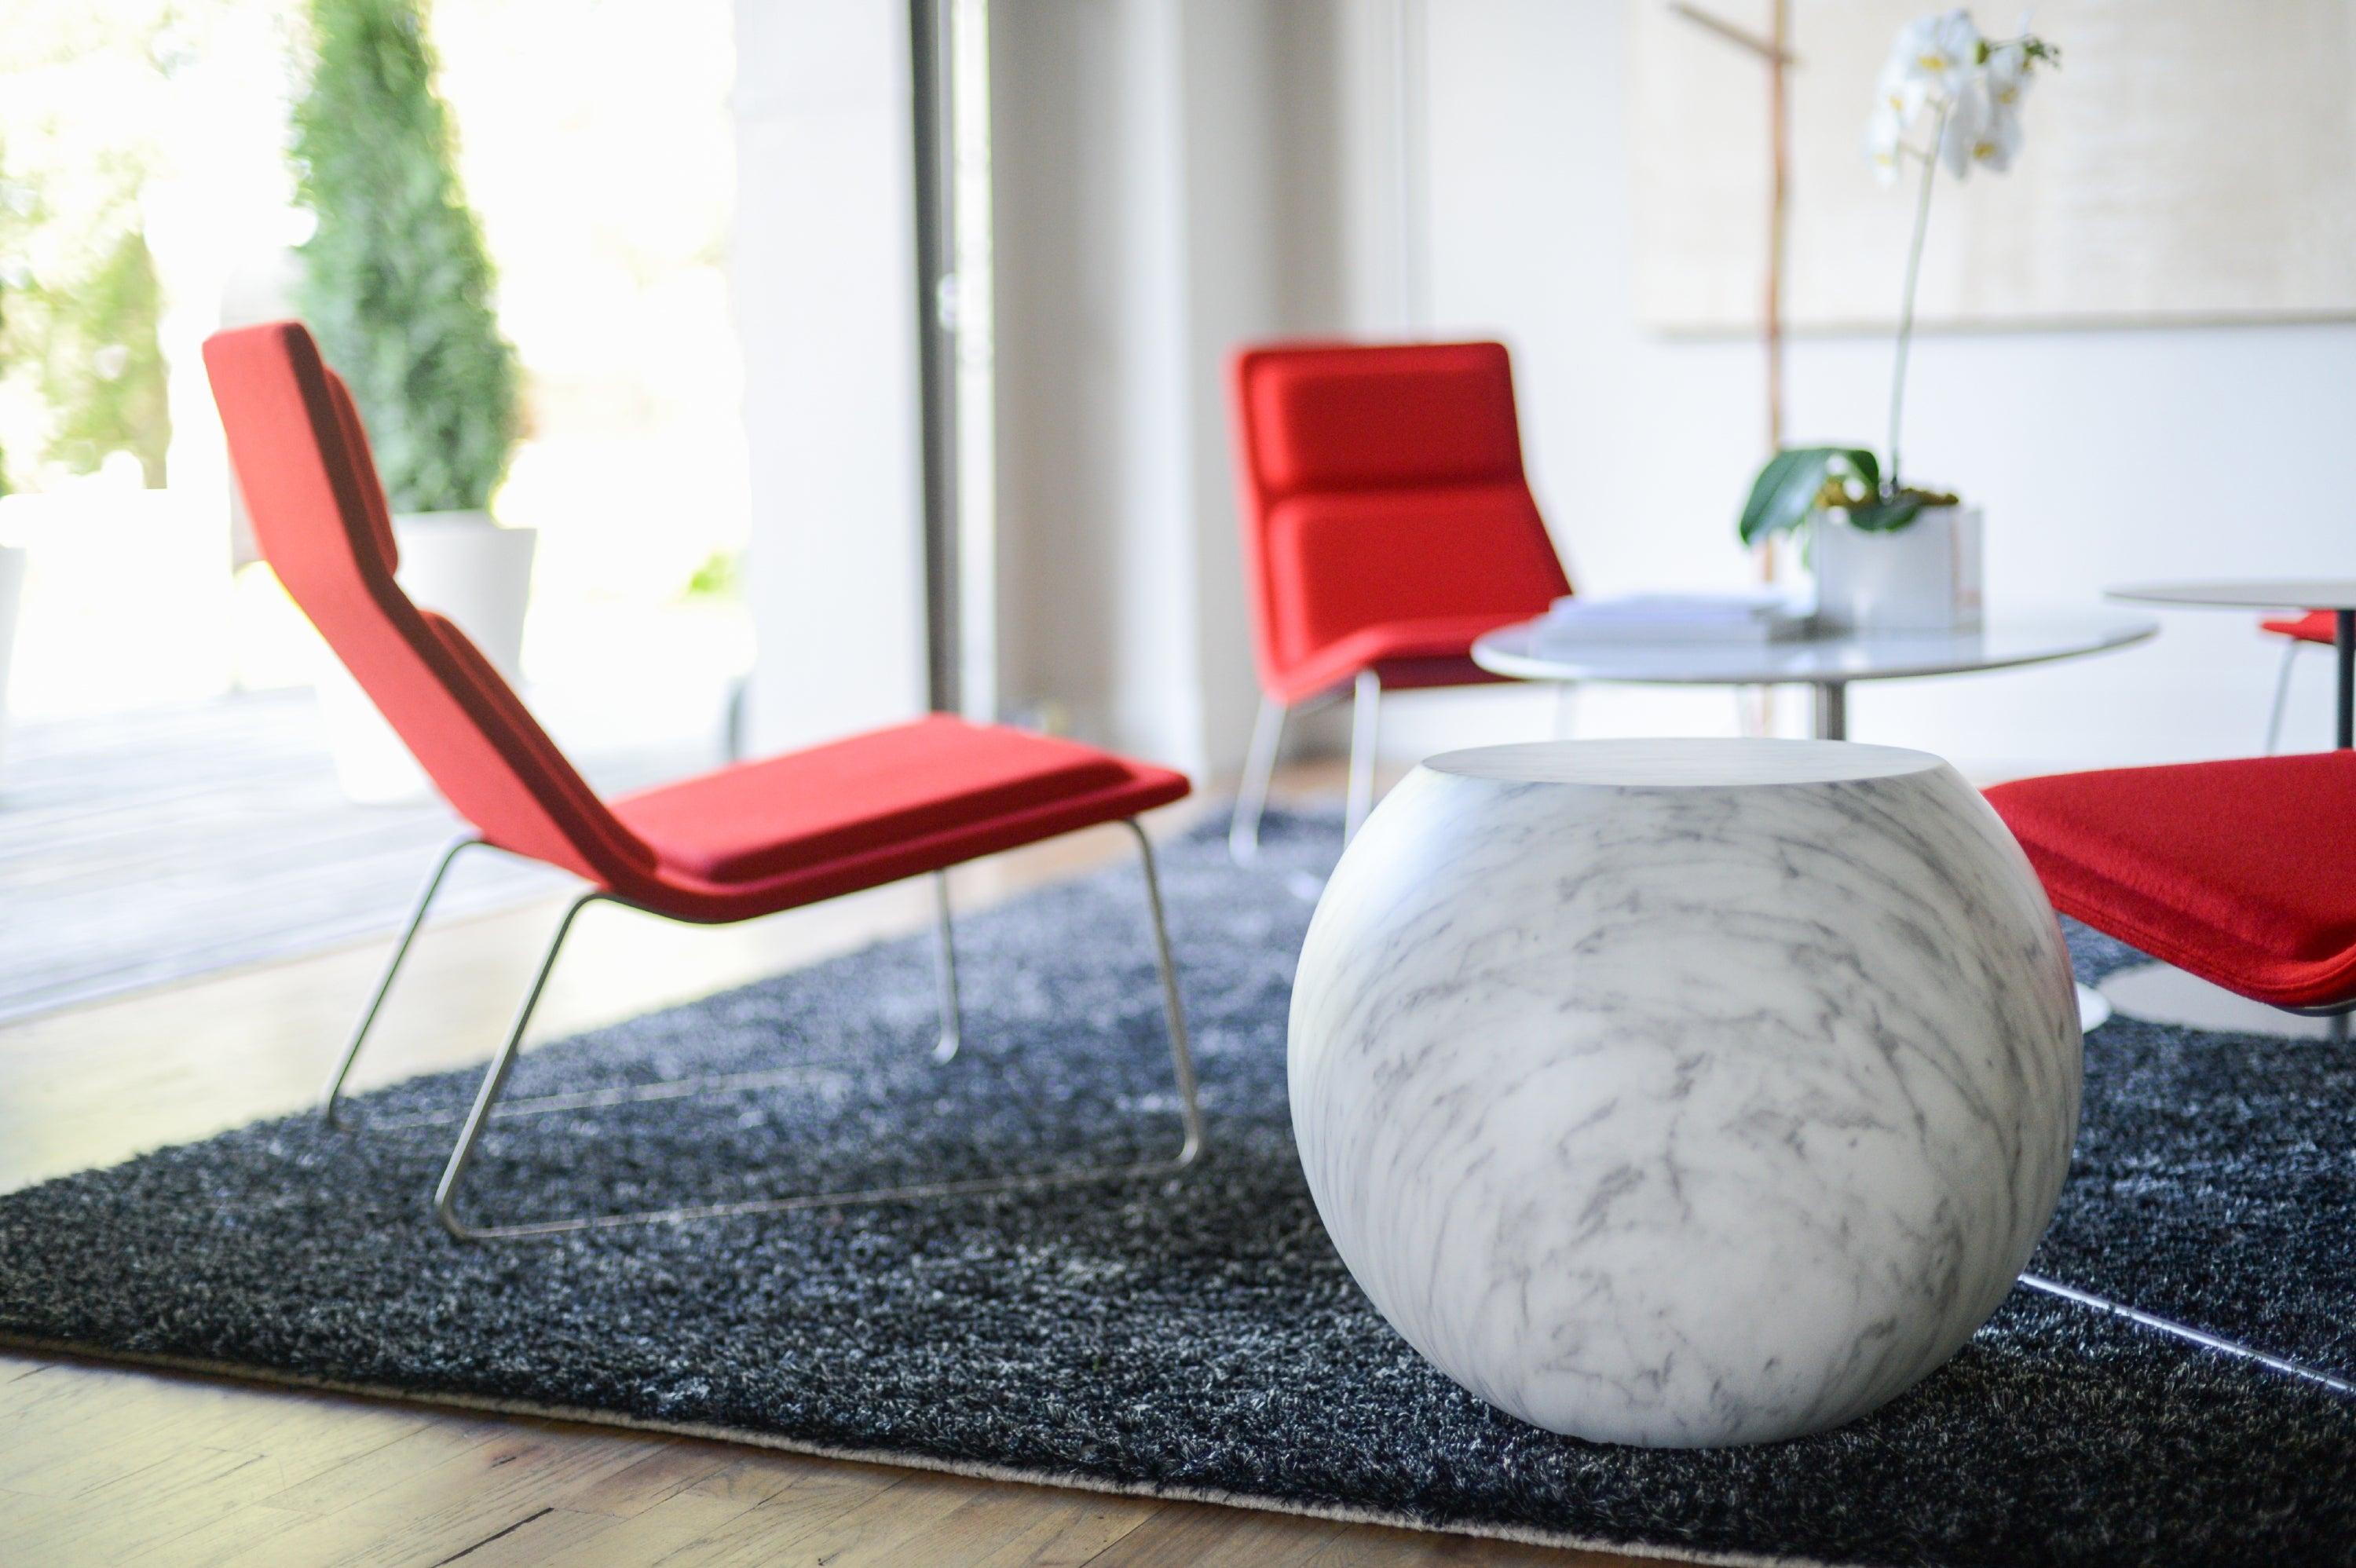 The perfect accent, with an ironic touch and eloquent presence, the bong table by Giulio Cappellini is composed of a solid sphere and a round top. The bong coffee table is available in several distinctive versions, fiberglass lacquered white,